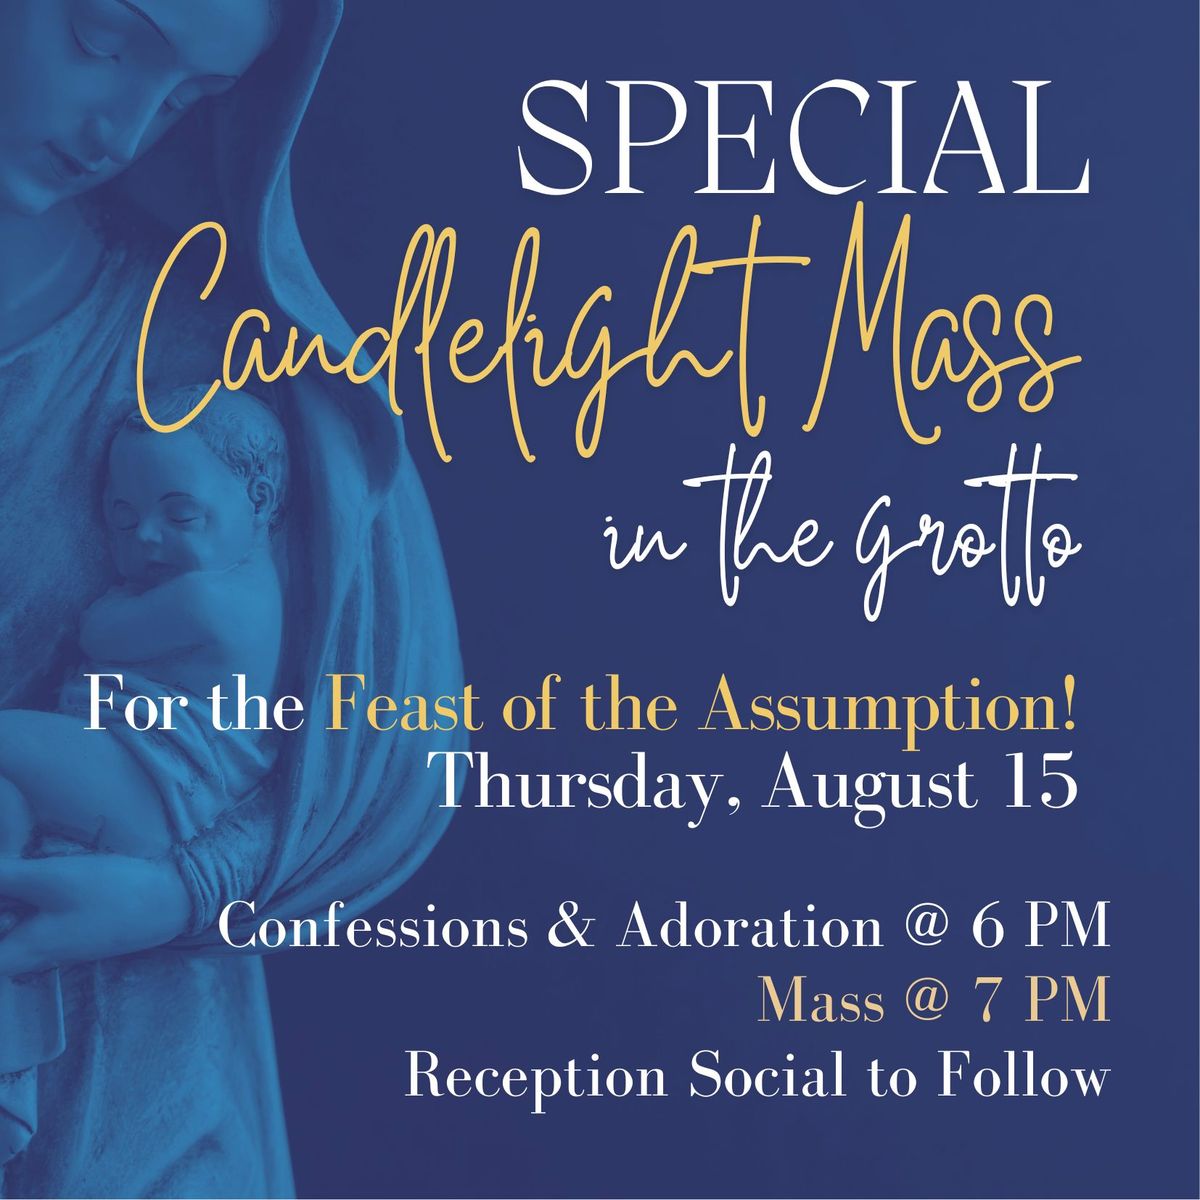 Special Candlelight Mass for The Feast of the Assumption